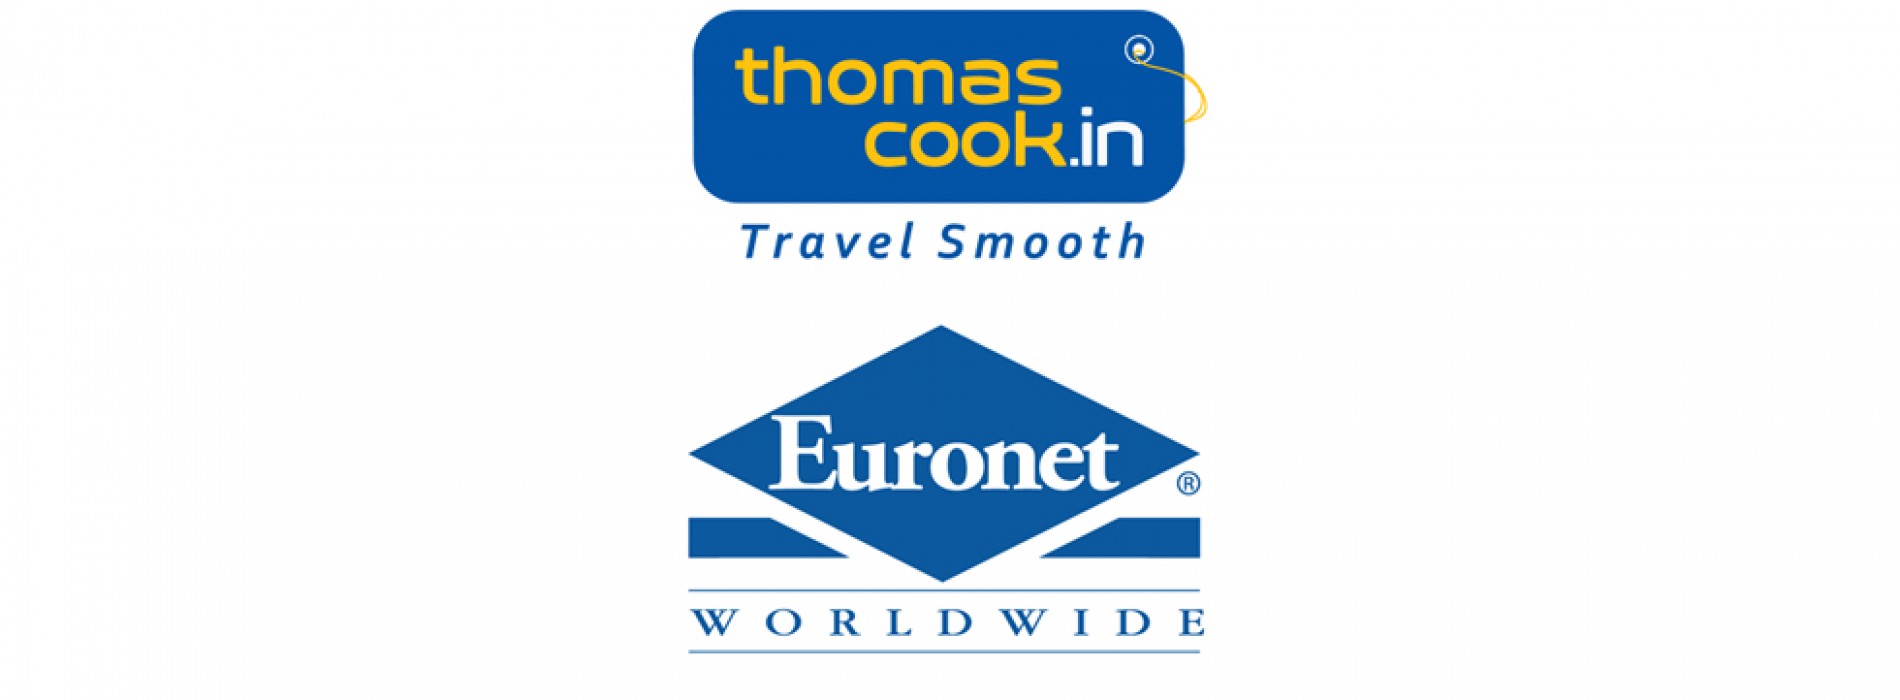 Thomas Cook India partners with Euronet Worldwide